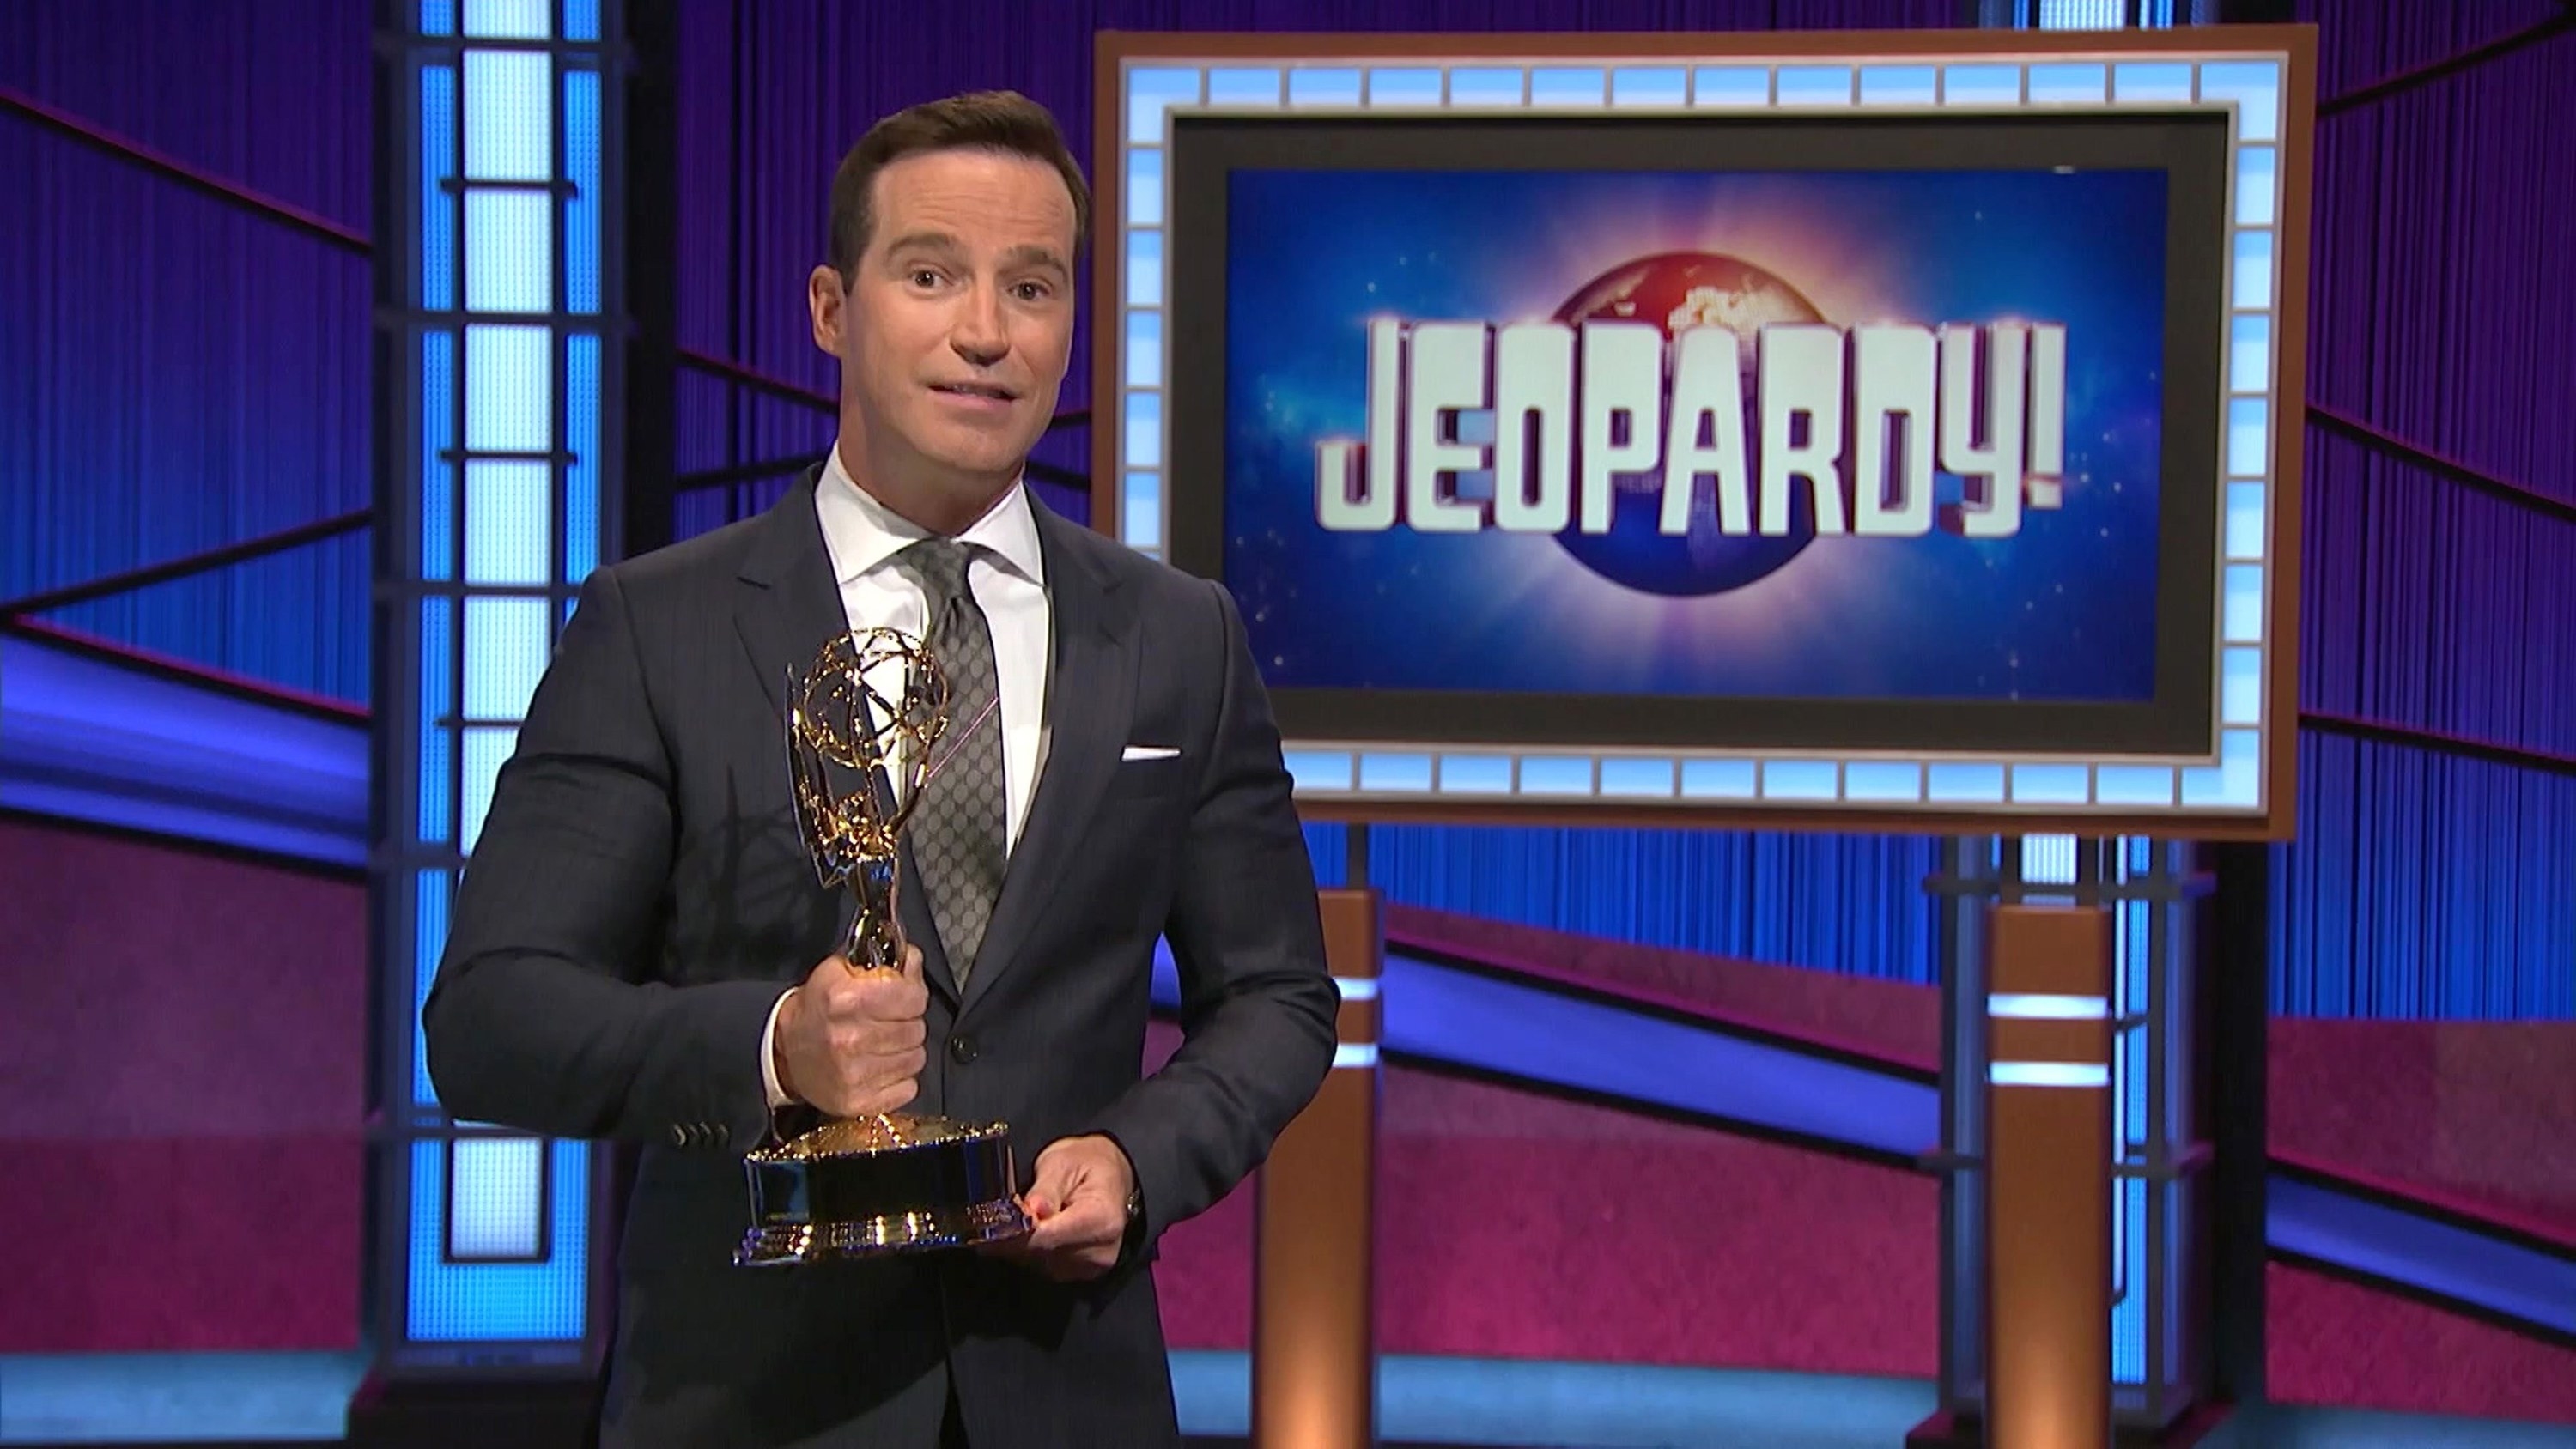 Mike Richards holding an Emmy on the Jeopardy! set